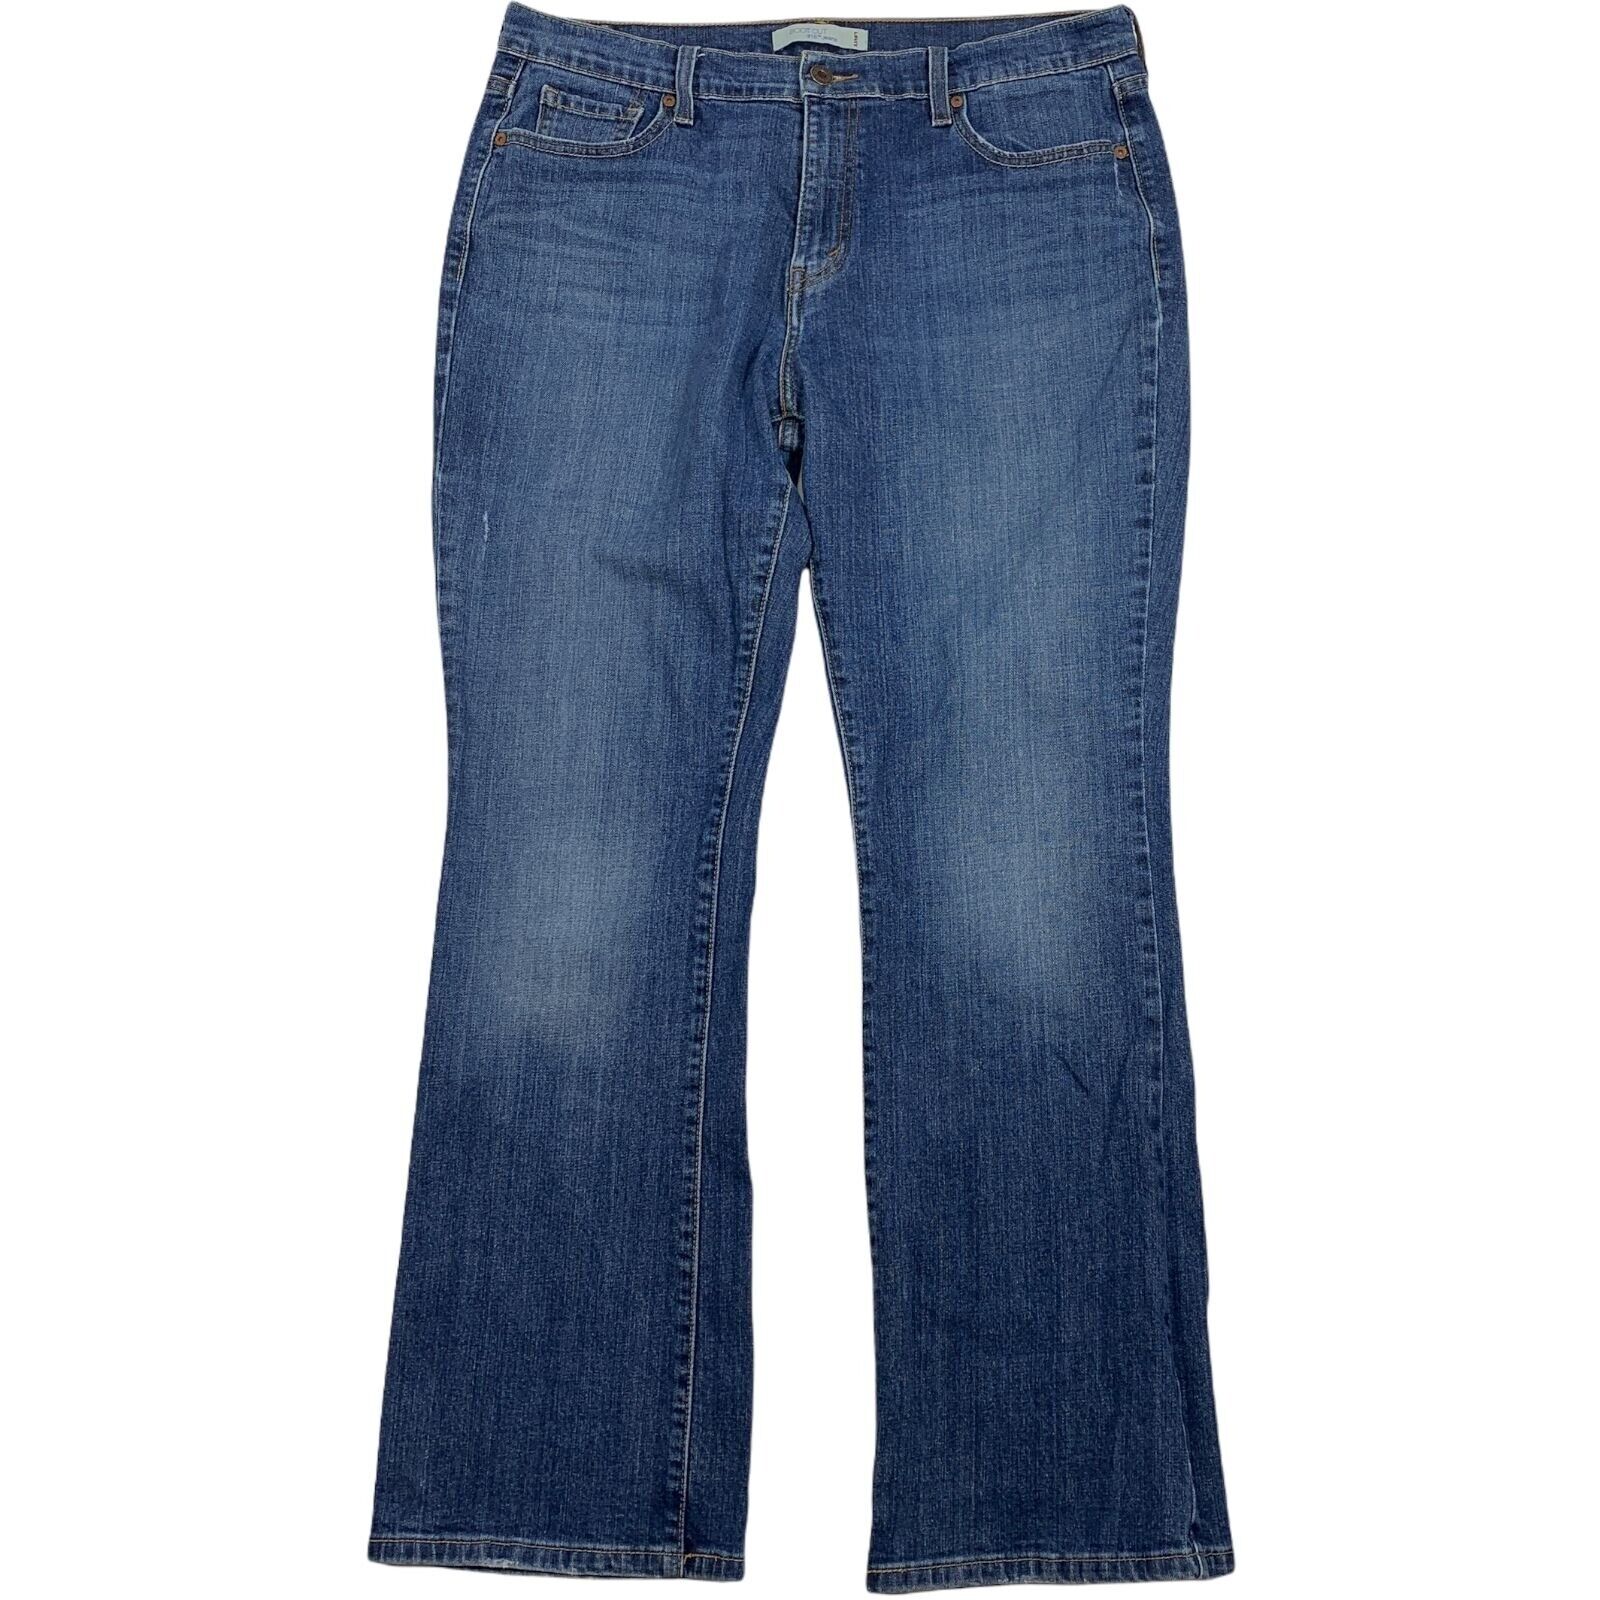 Levi's 515 Boot Cut Jeans 14 36" X 31" Western - image 1